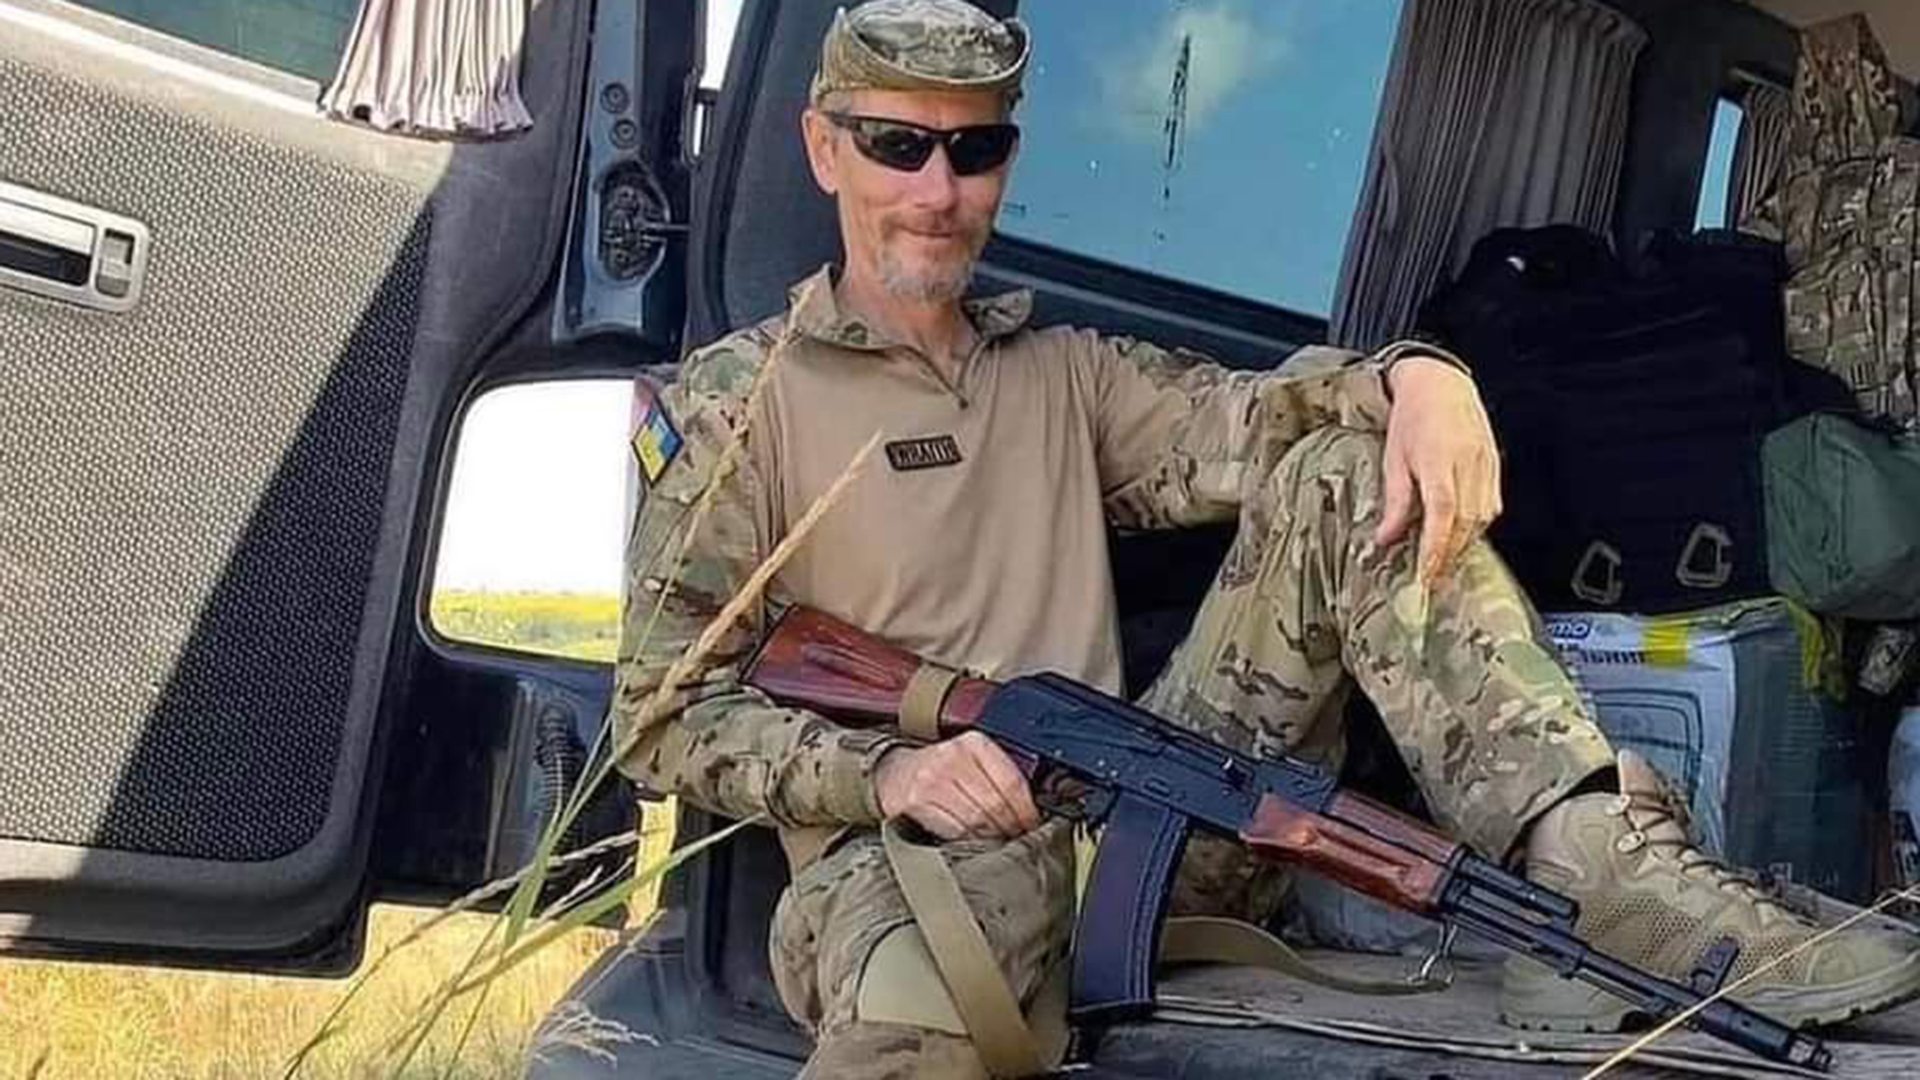 ‘He was willing to sacrifice himself:’ Army veteran killed in Ukraine